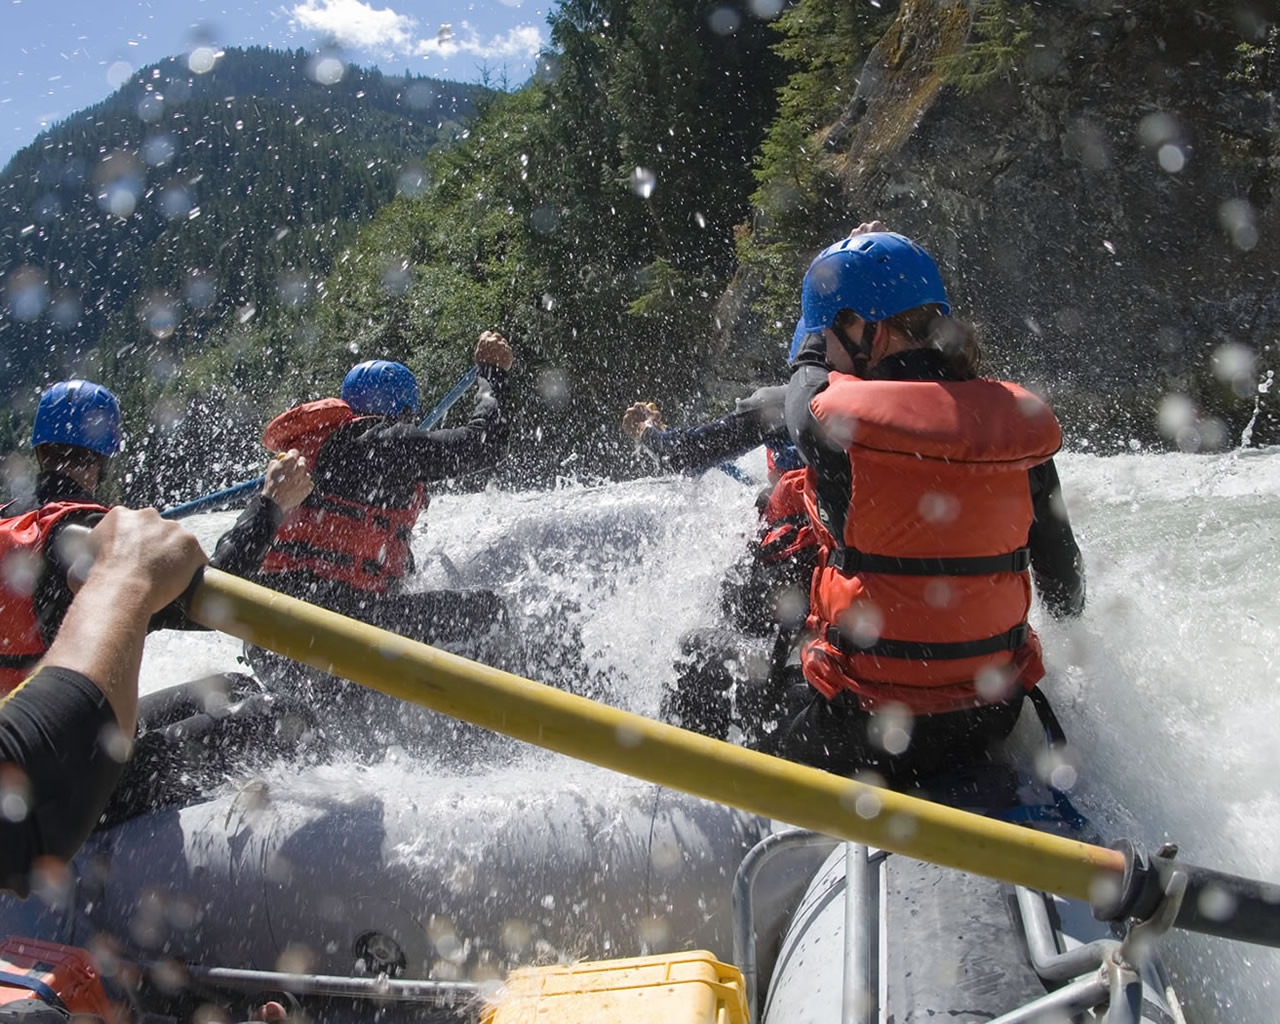 Rafting team for 1280 x 1024 resolution